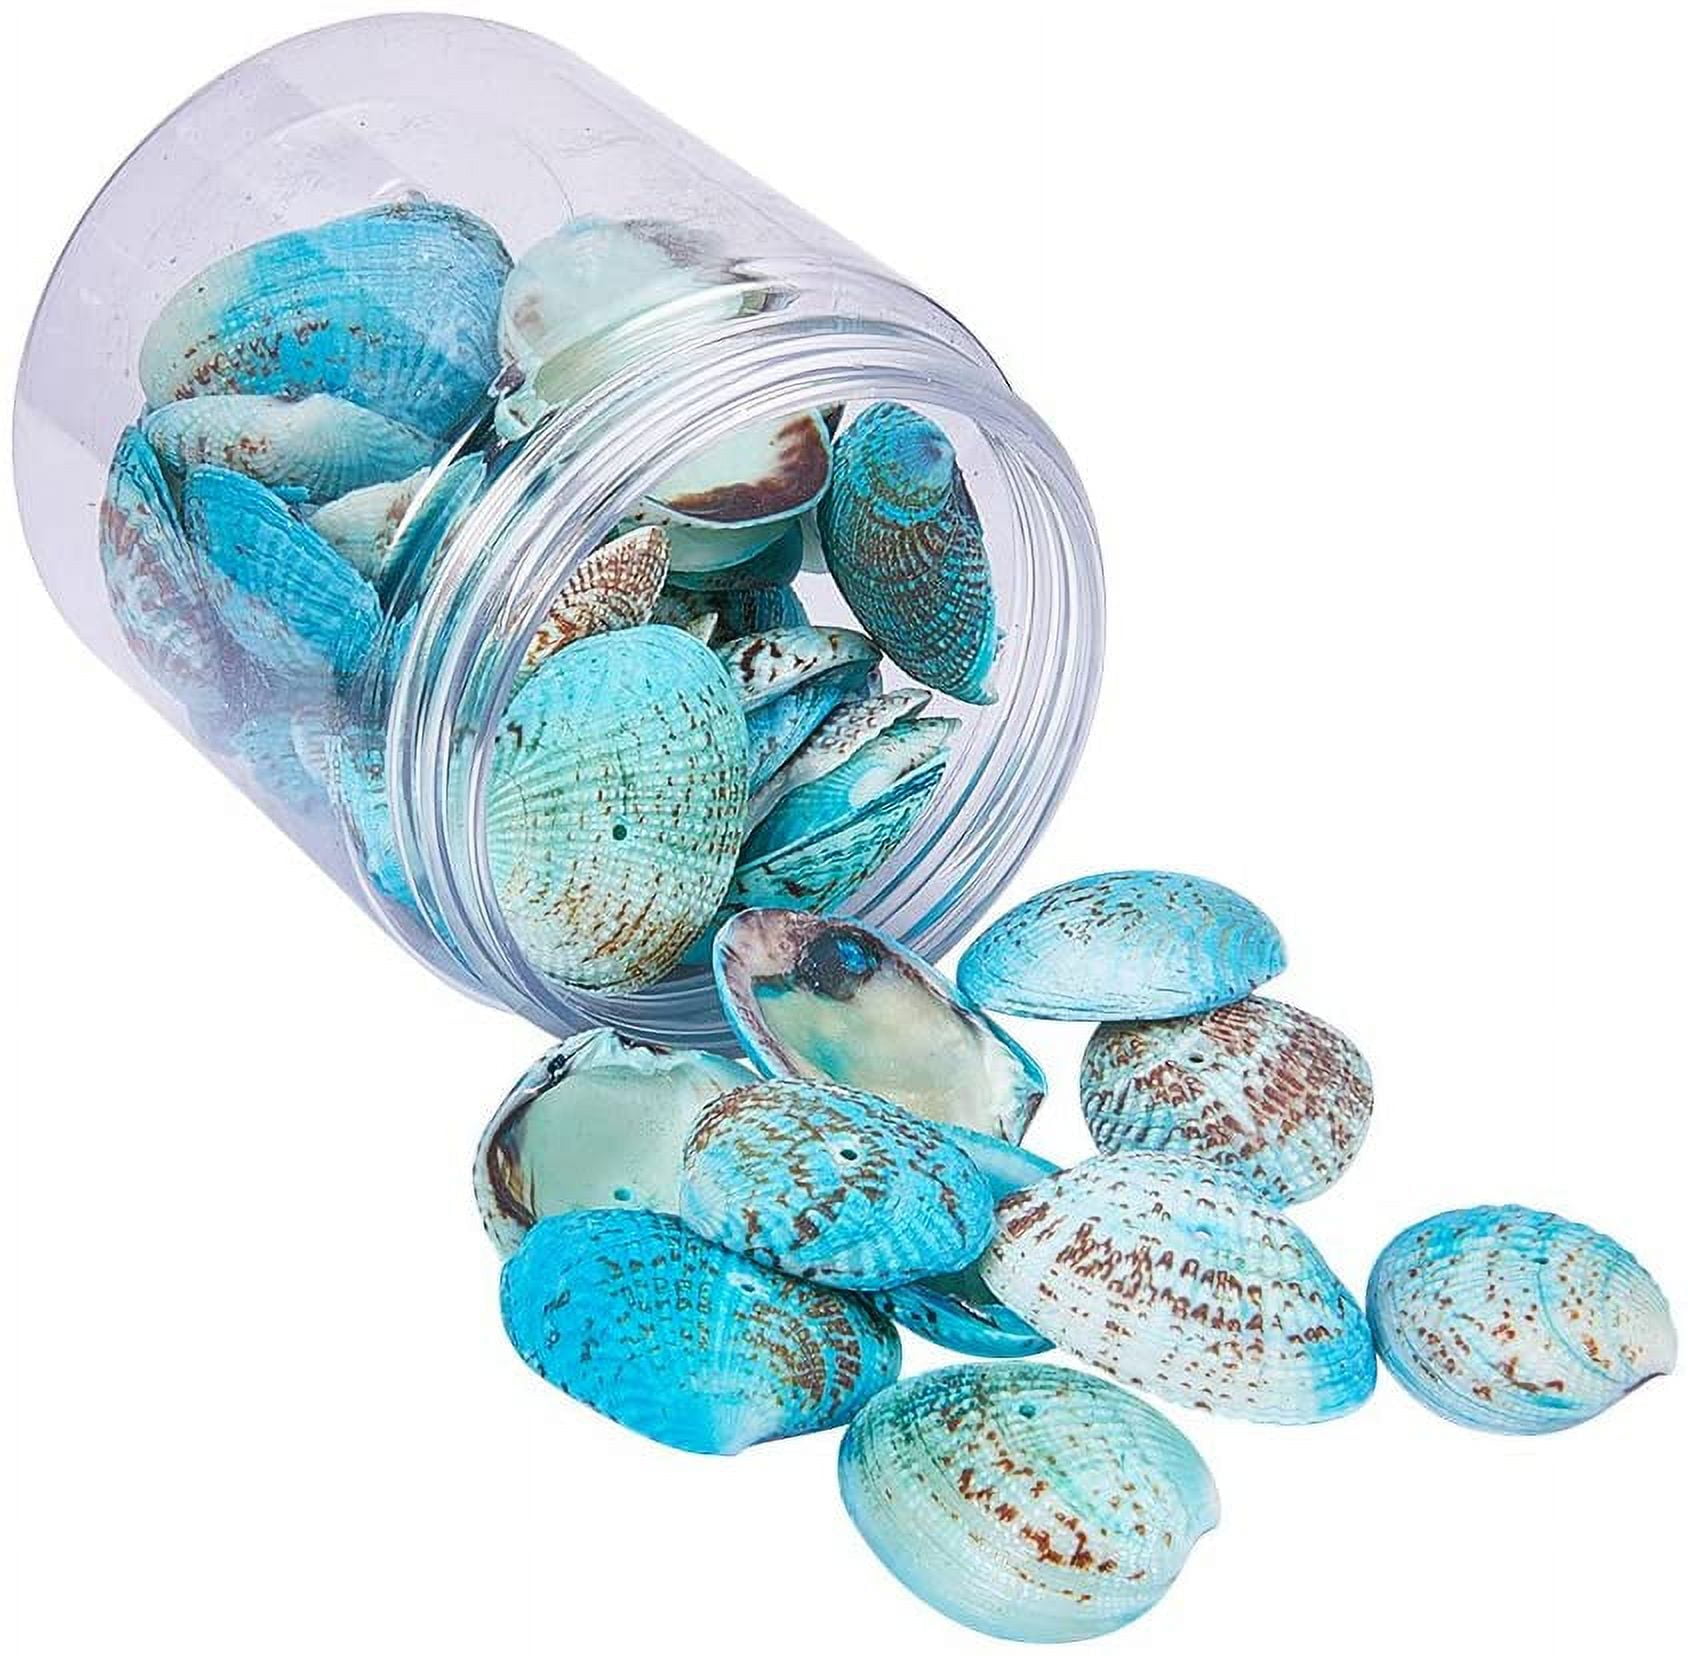  LUCKY BABY Sea Shells Mixed with Sea Glass 7 Ounces for Crafts,  Natural Scallop Seashells for Decorating, Seaglass Decor for Fish Tank Vase  Fillers Home Deco, Beach Themed Party Wedding 